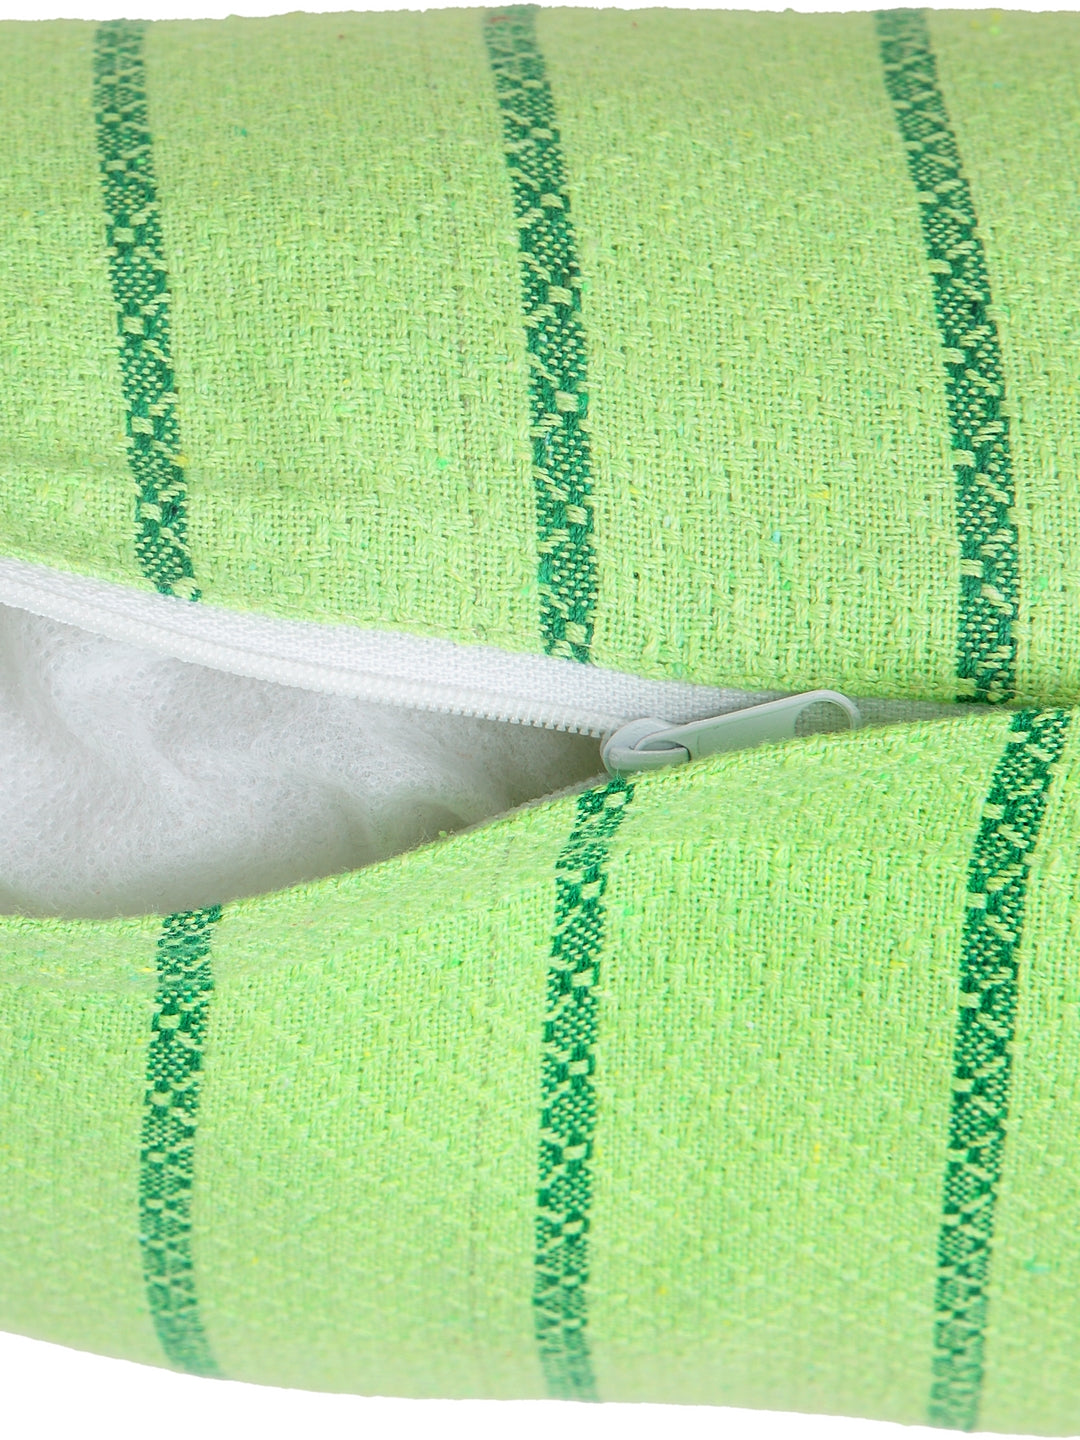 KLOTTHE Set of Five ParrotGreen Poly Cotton Cushion Covers With Microfibre Fillers (40X40 cm)